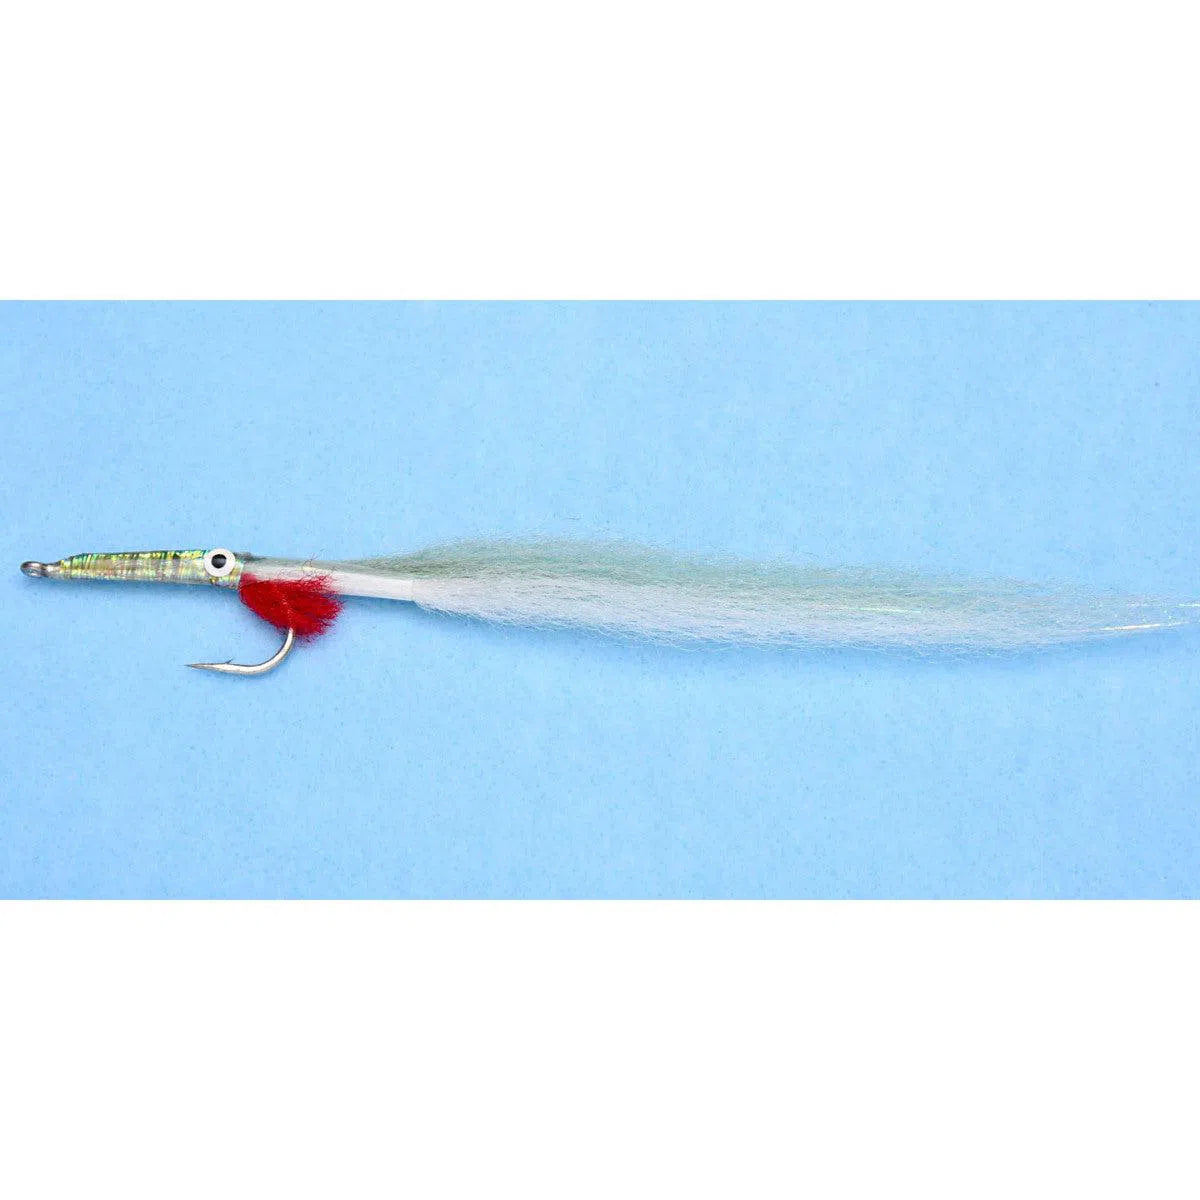 Enrico Puglisi Needle Fish Fly-Lure - Saltwater Fly-Enrico Puglisi-Needle Fish-Size #3/0-Fishing Station